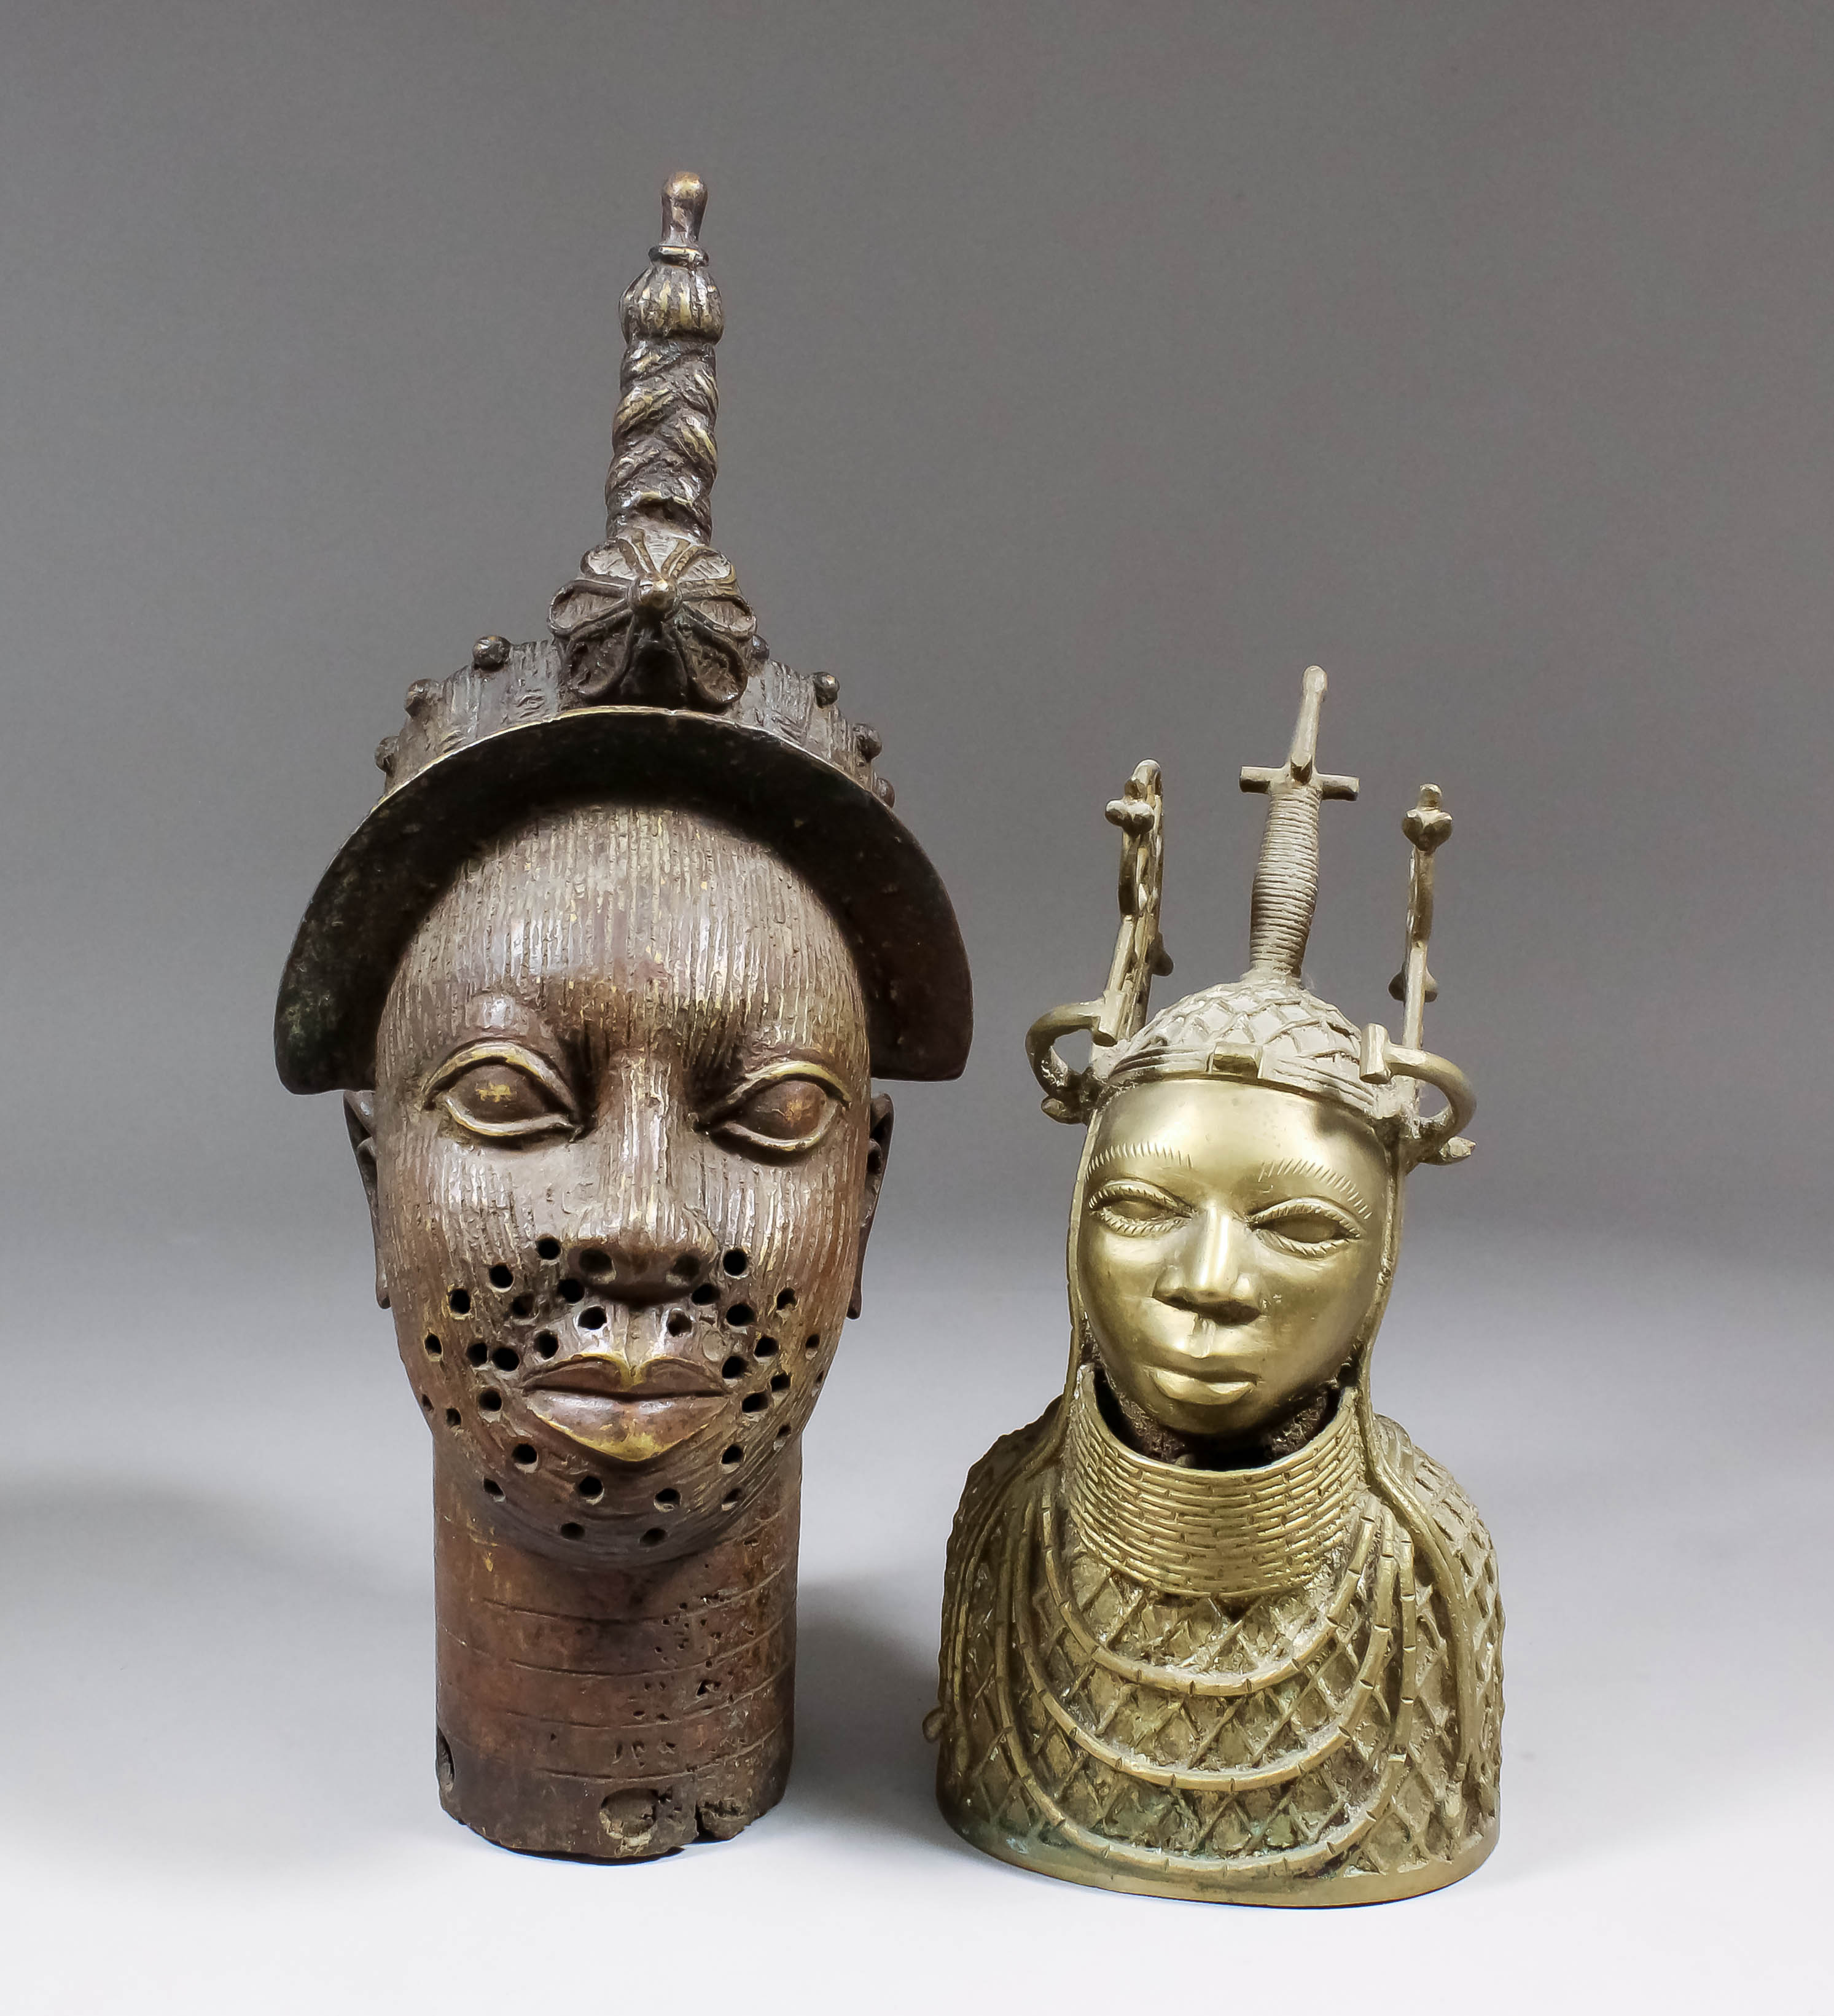 A Benin cast brass head of a male with scarification marks to his face and ornate headpiece, 16ins